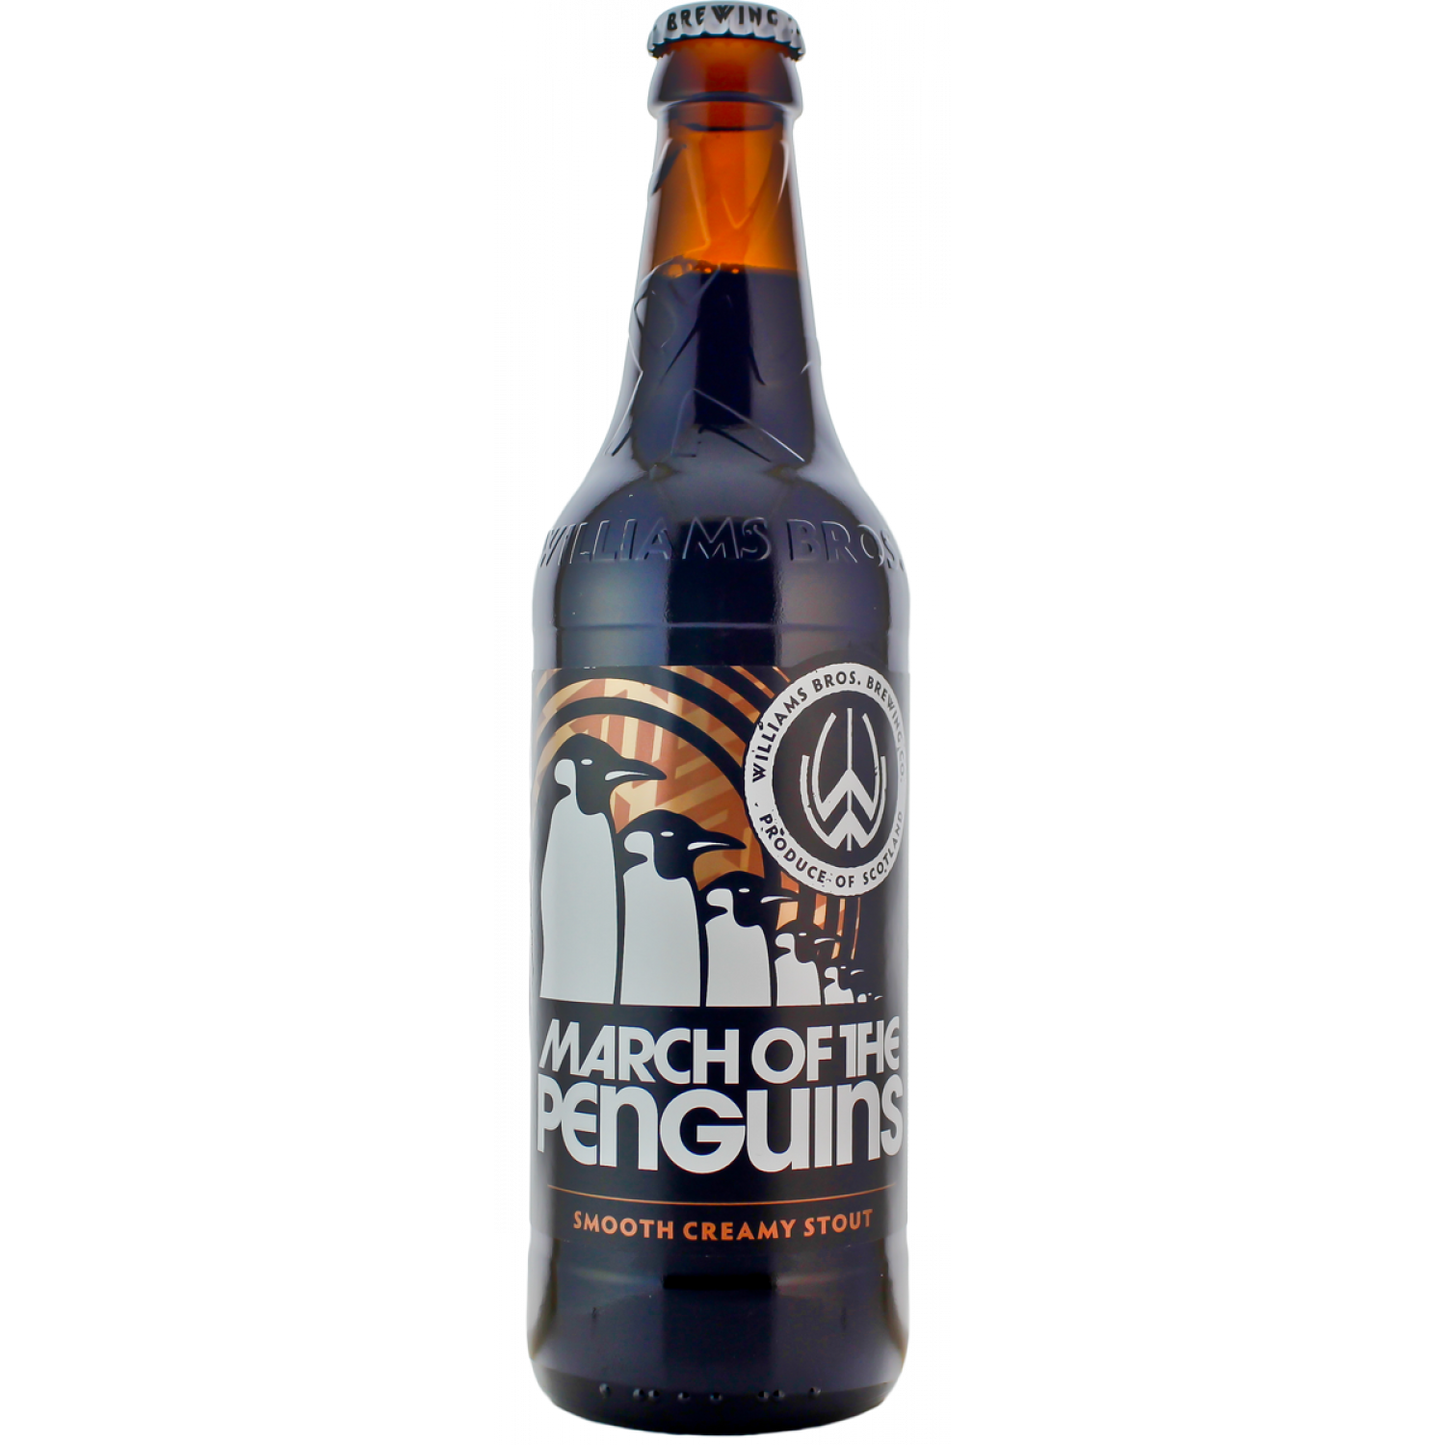 Williams Brothers March Of The Penguins - Smooth Creamy Stout 500ml-Scottish Beers-5034743200644-Fountainhall Wines